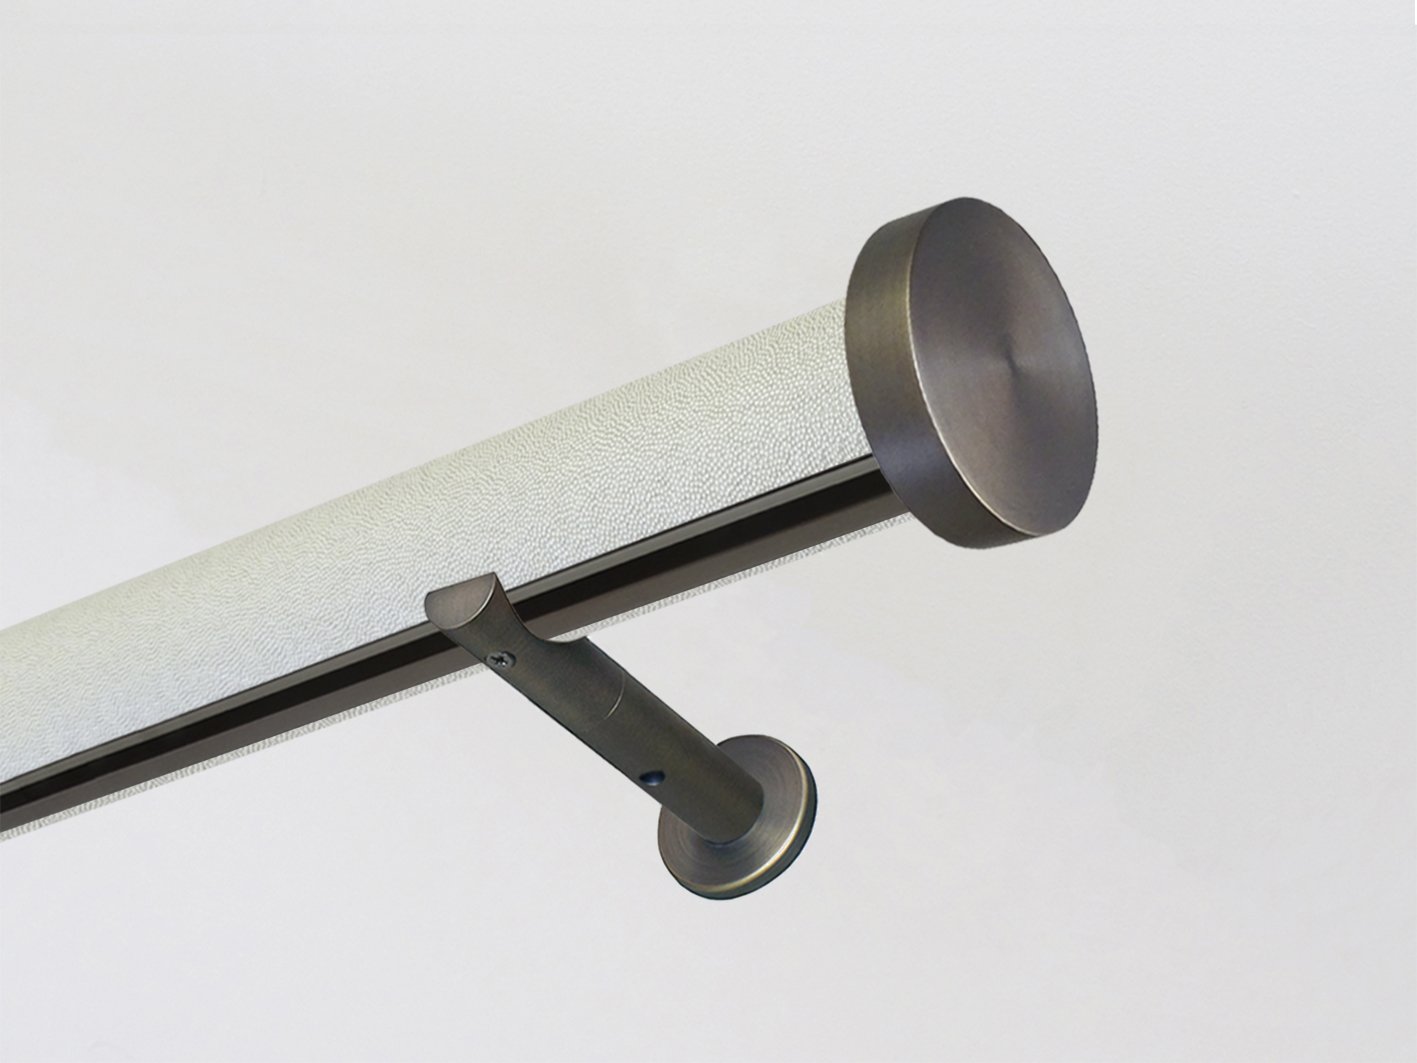 shagreen textured white pepper tracked curtain pole bronze track by Walcot House